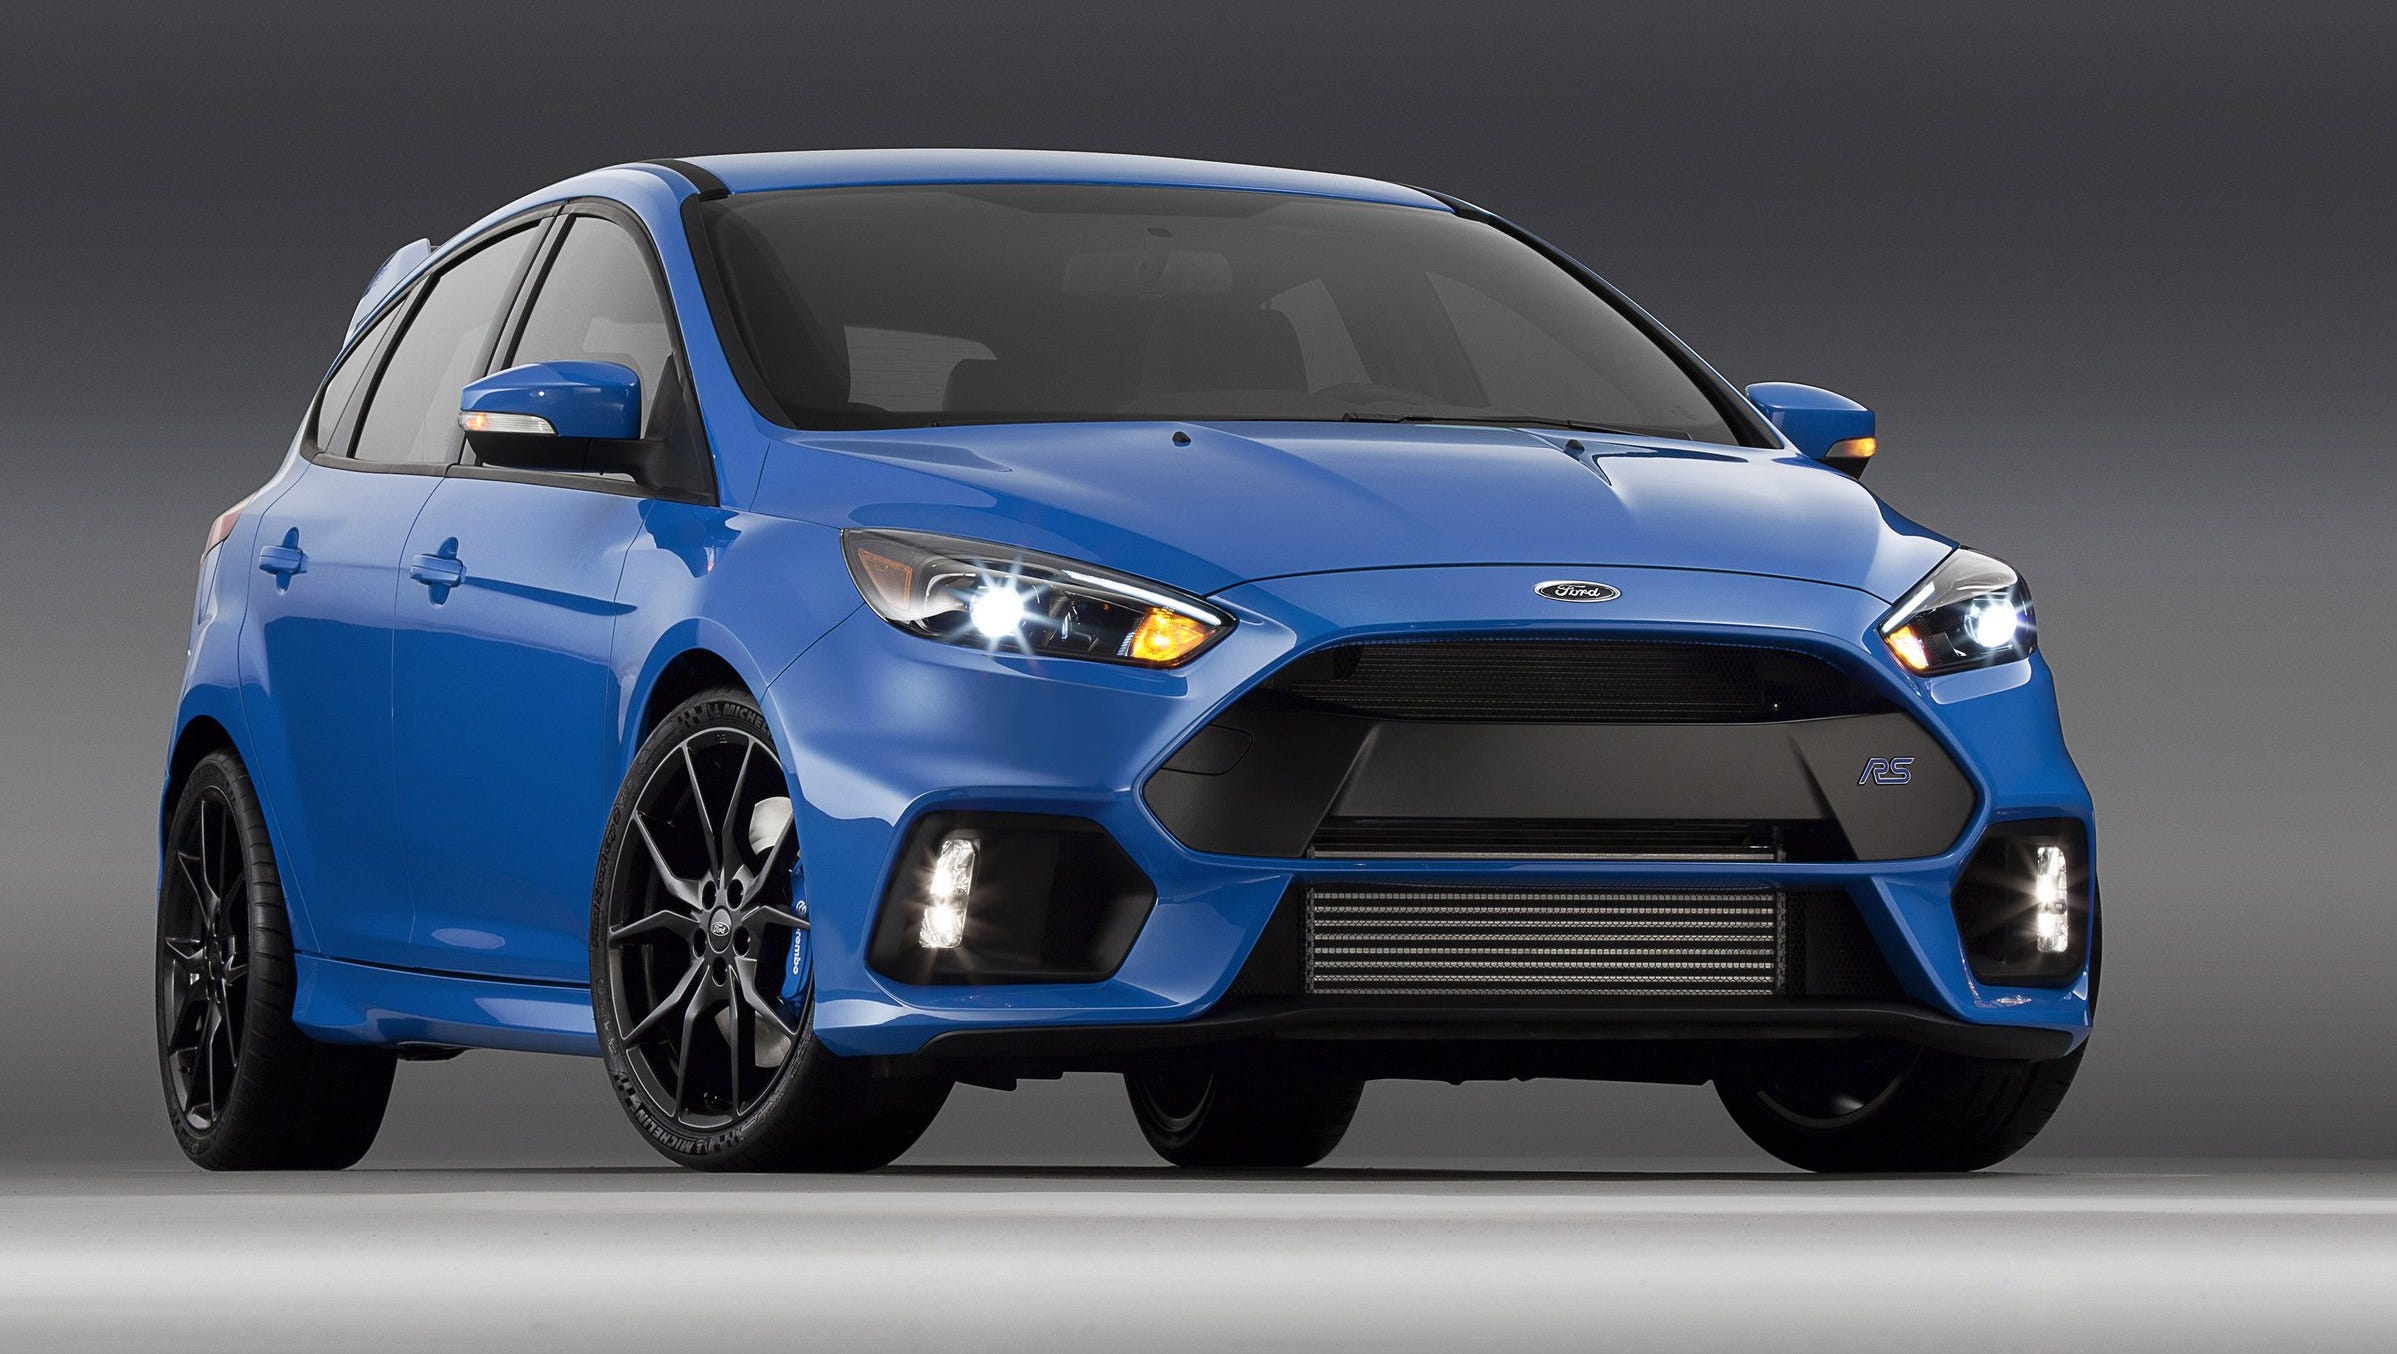 2016 Ford Focus RS at New York auto show; on sale spring 2016